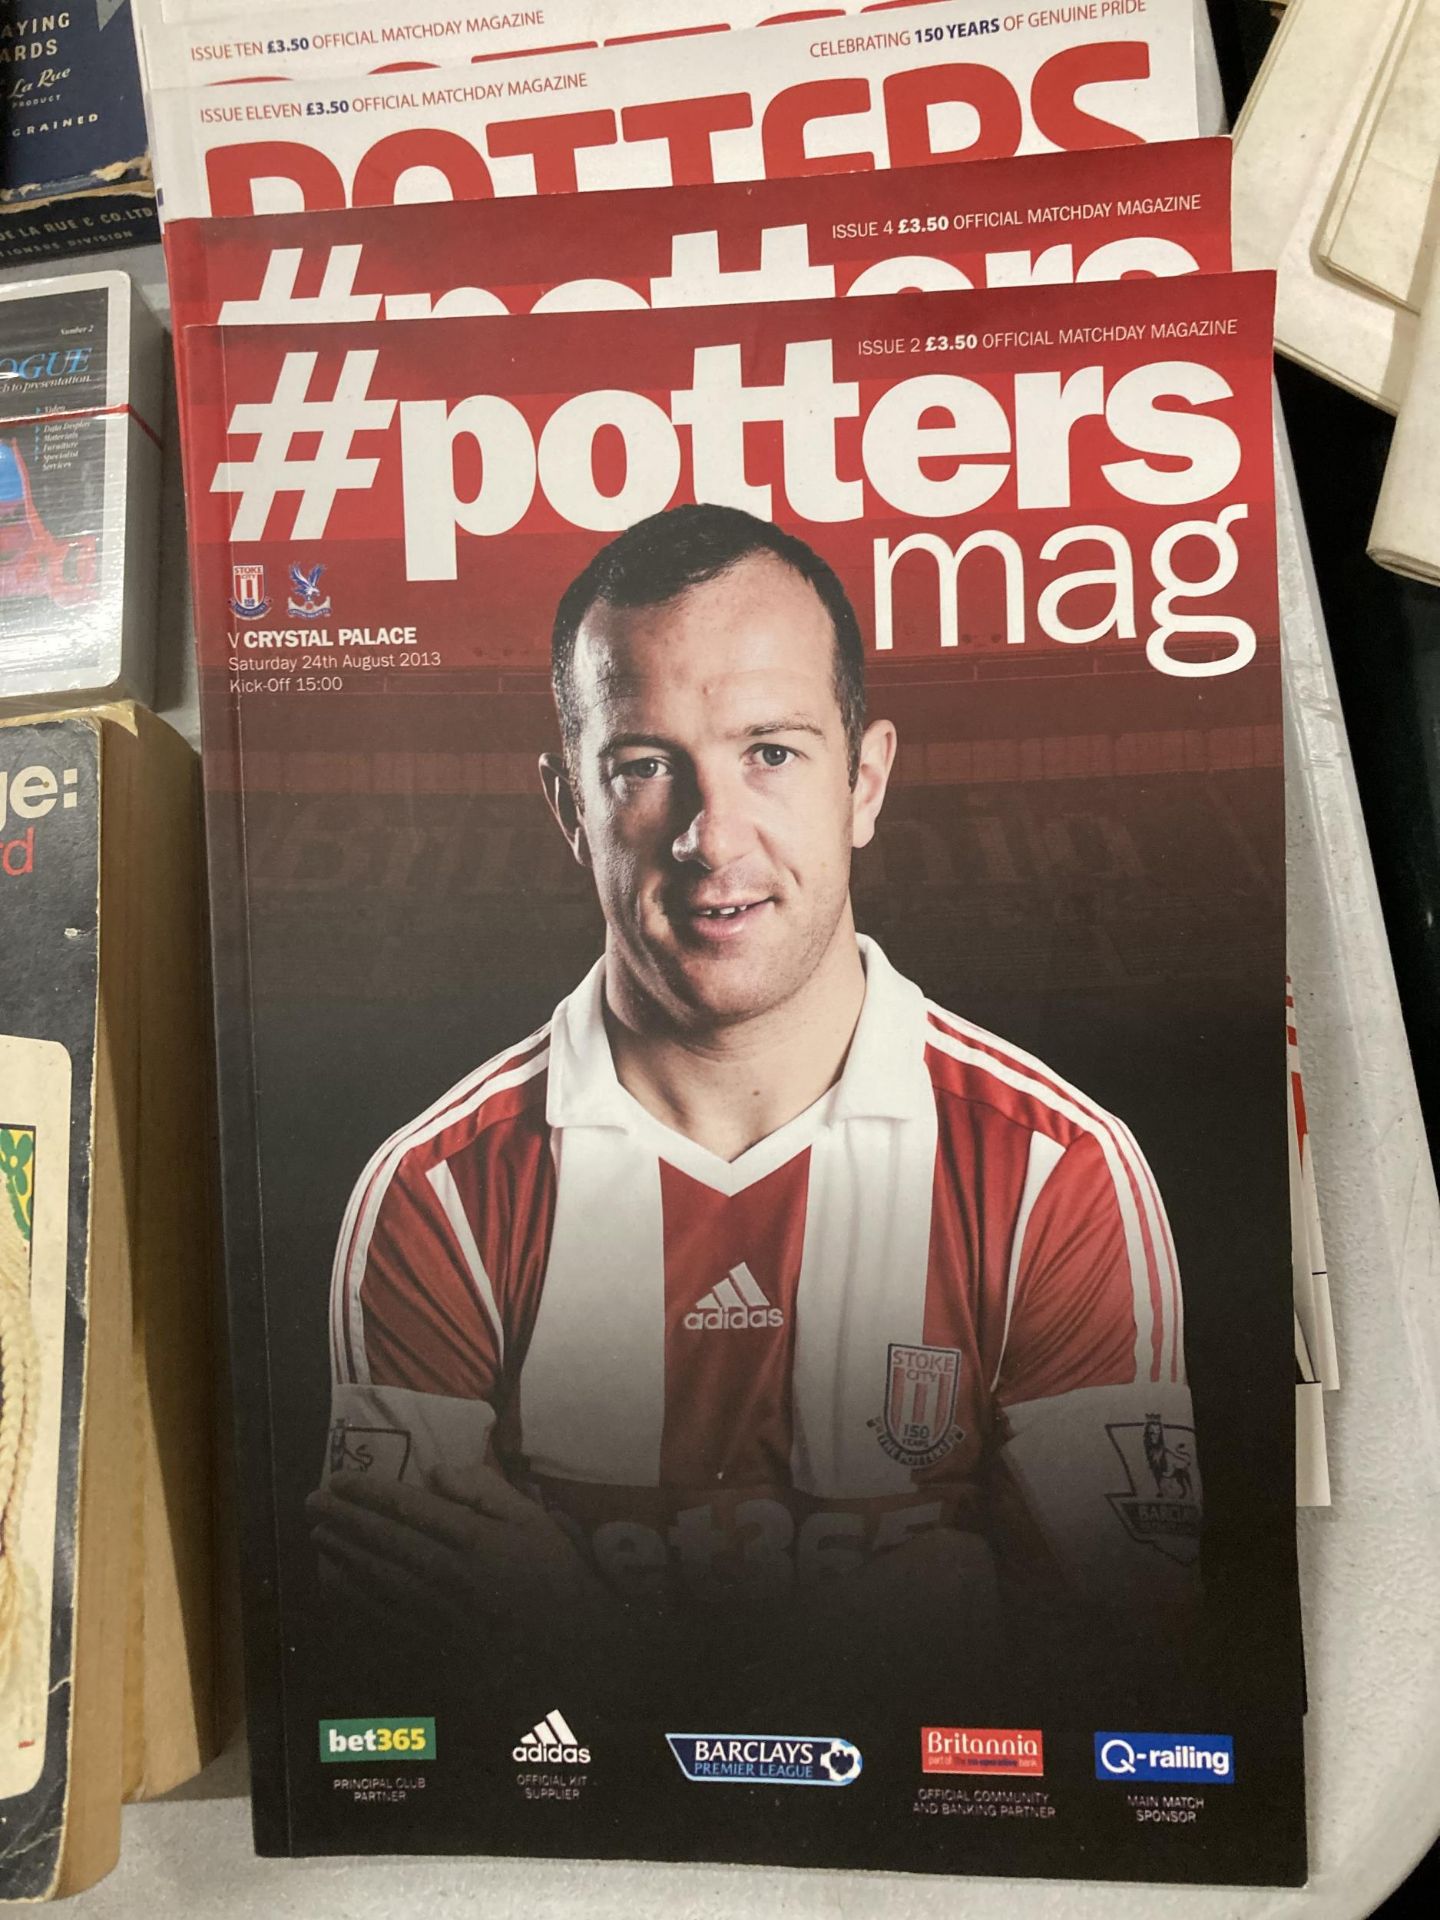 A COLLECTION OF 27 MATCHDAY POTTERS MAGAZINES - Image 2 of 4